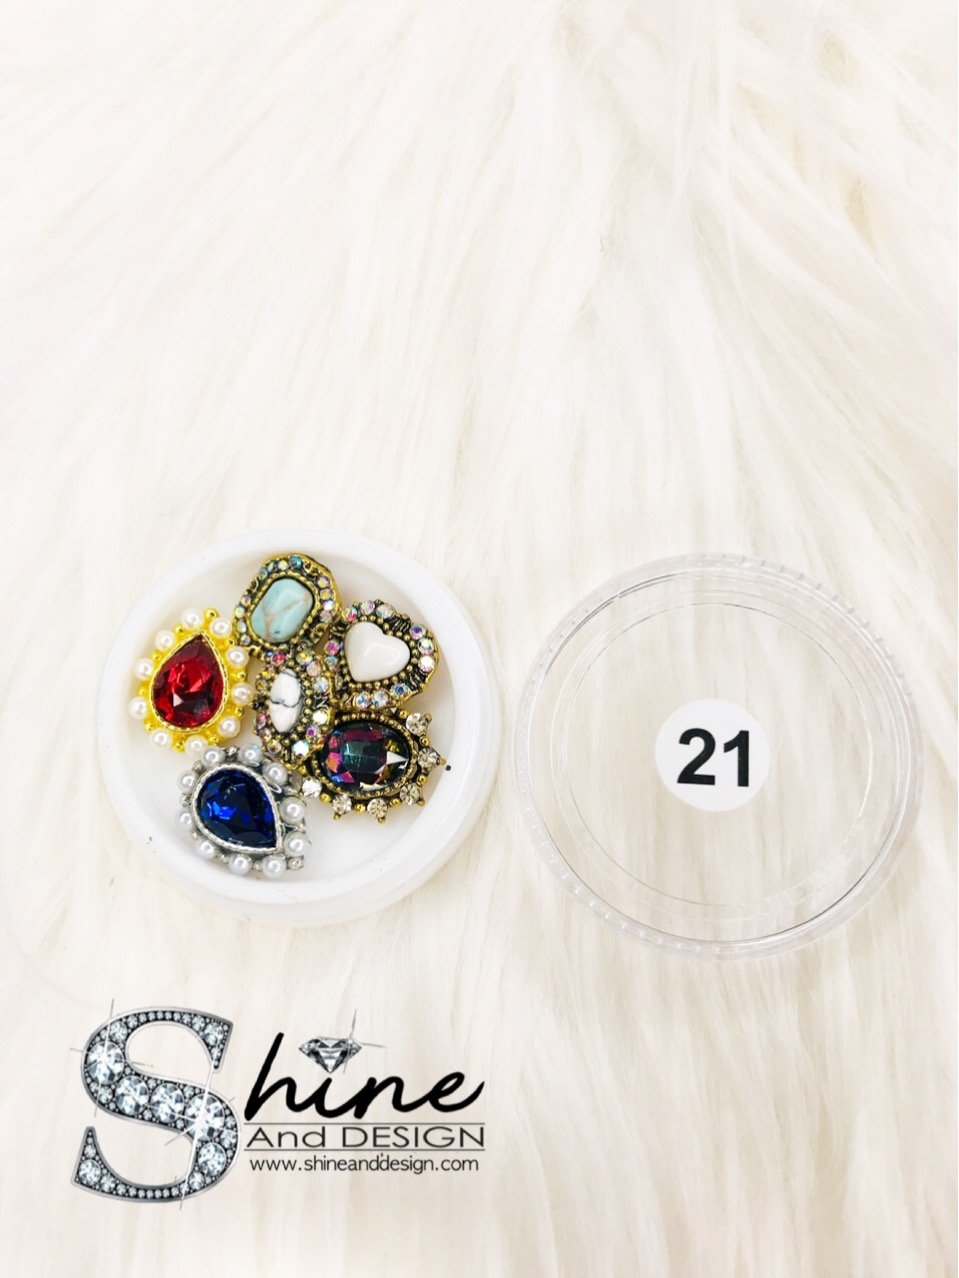 SHINE- Mix Alloy Charms with Crystals - Fancy Collection #21